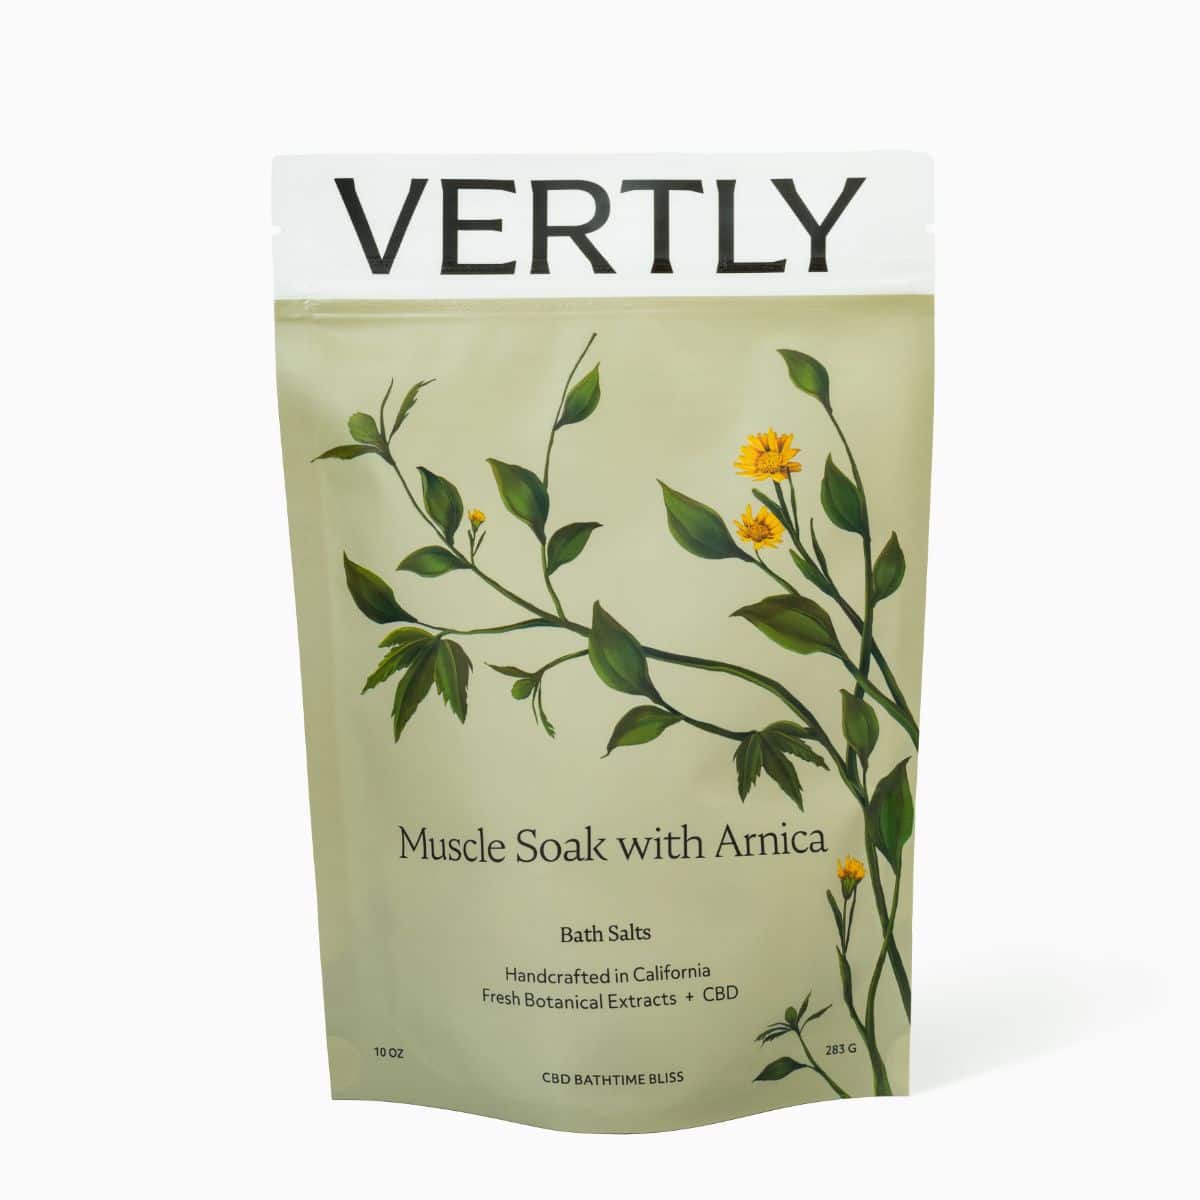 A bag of vertly tea is shown.